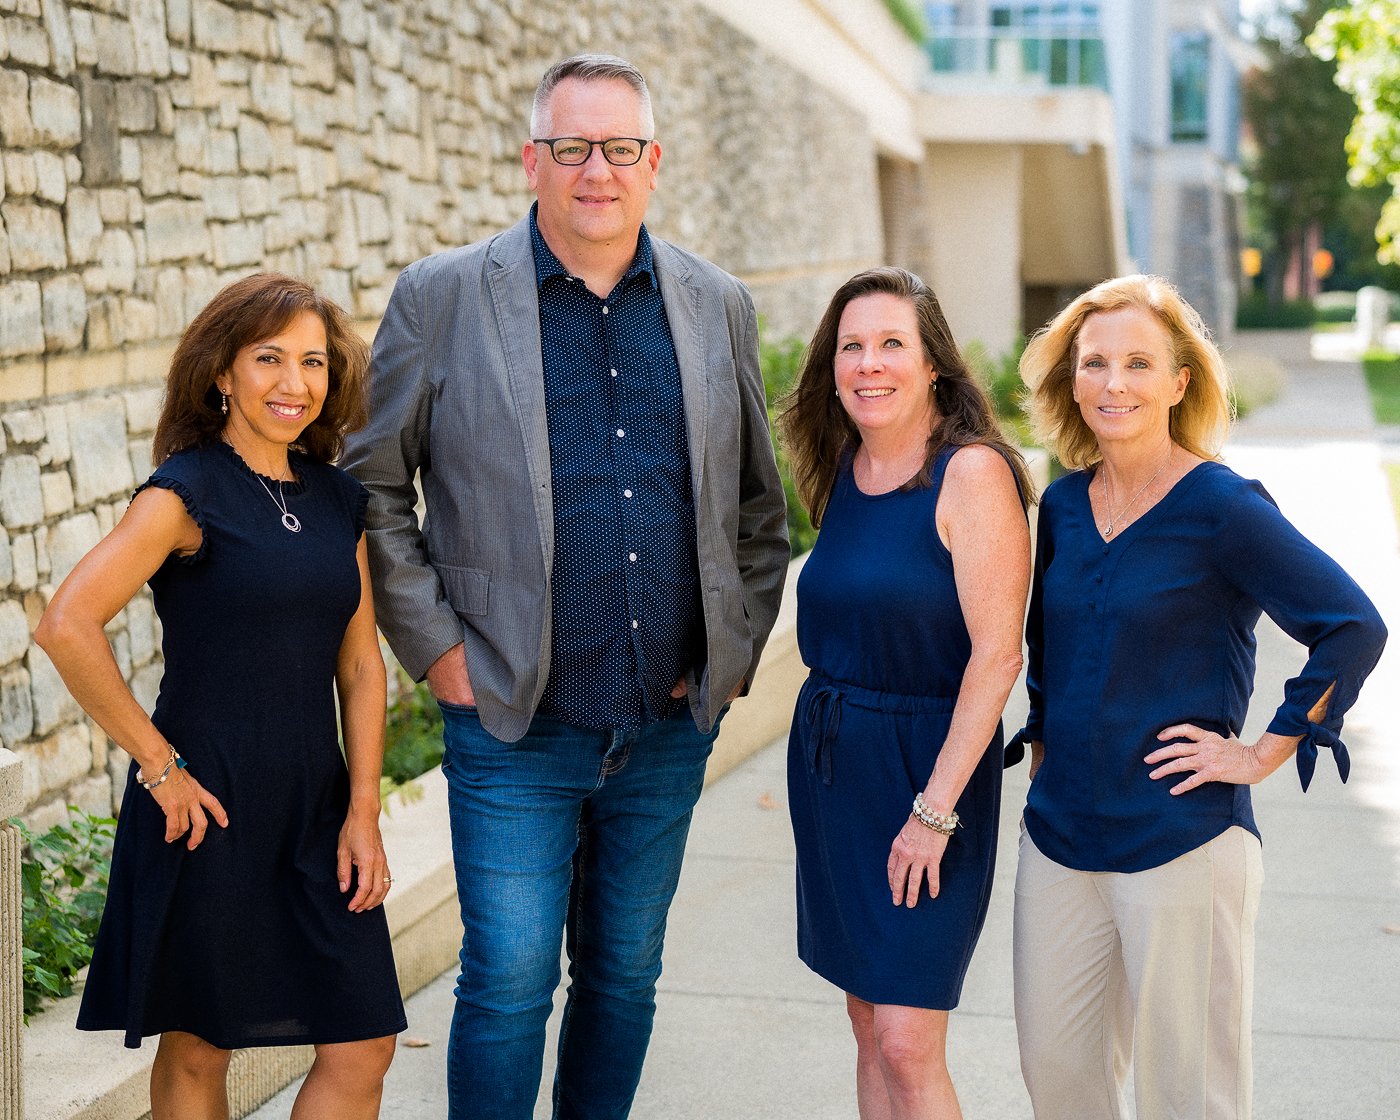 The Greater Reston Living Team at Compass Real Estate. Including, Kathy Tracey, Graham Tracey, Luz Blakney, and Sheri Ranney